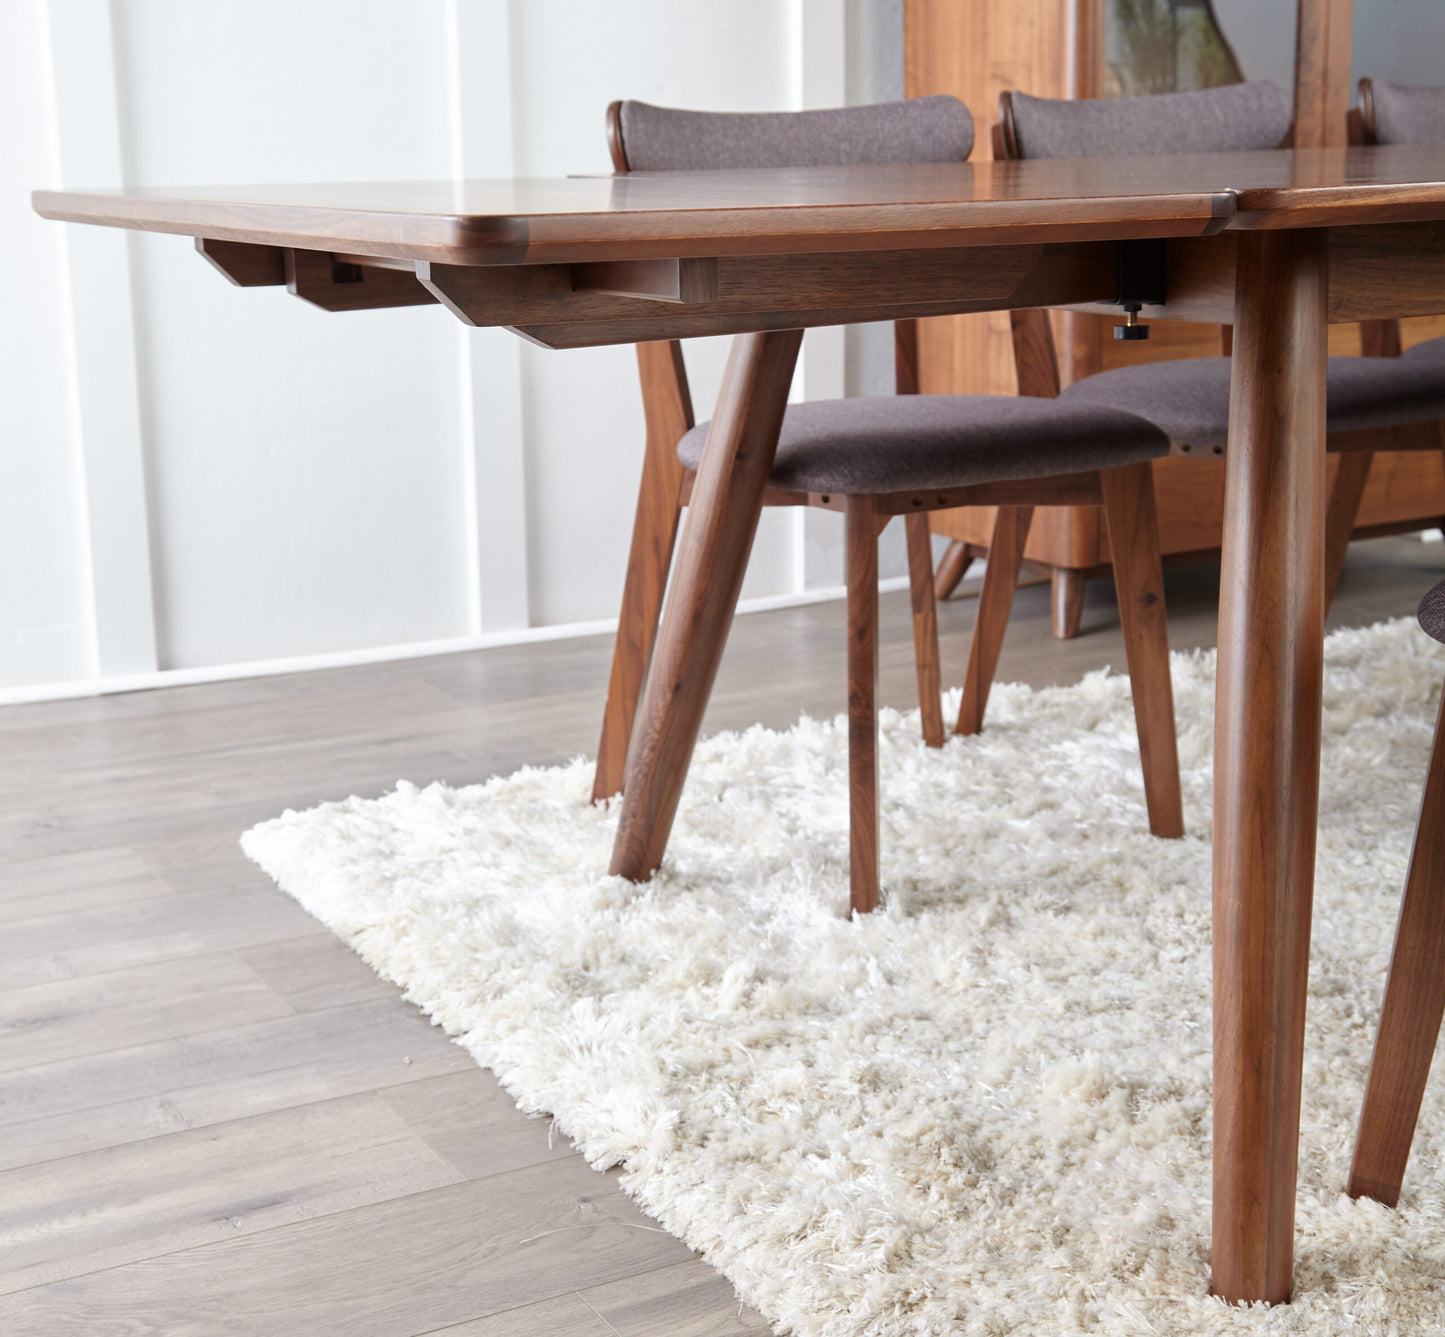 Tahoe American Walnut 77" Extendable Dining Table Dining Table Unique Furniture     Four Hands, Mid Century Modern Furniture, Old Bones Furniture Company, Old Bones Co, Modern Mid Century, Designer Furniture, https://www.oldbonesco.com/